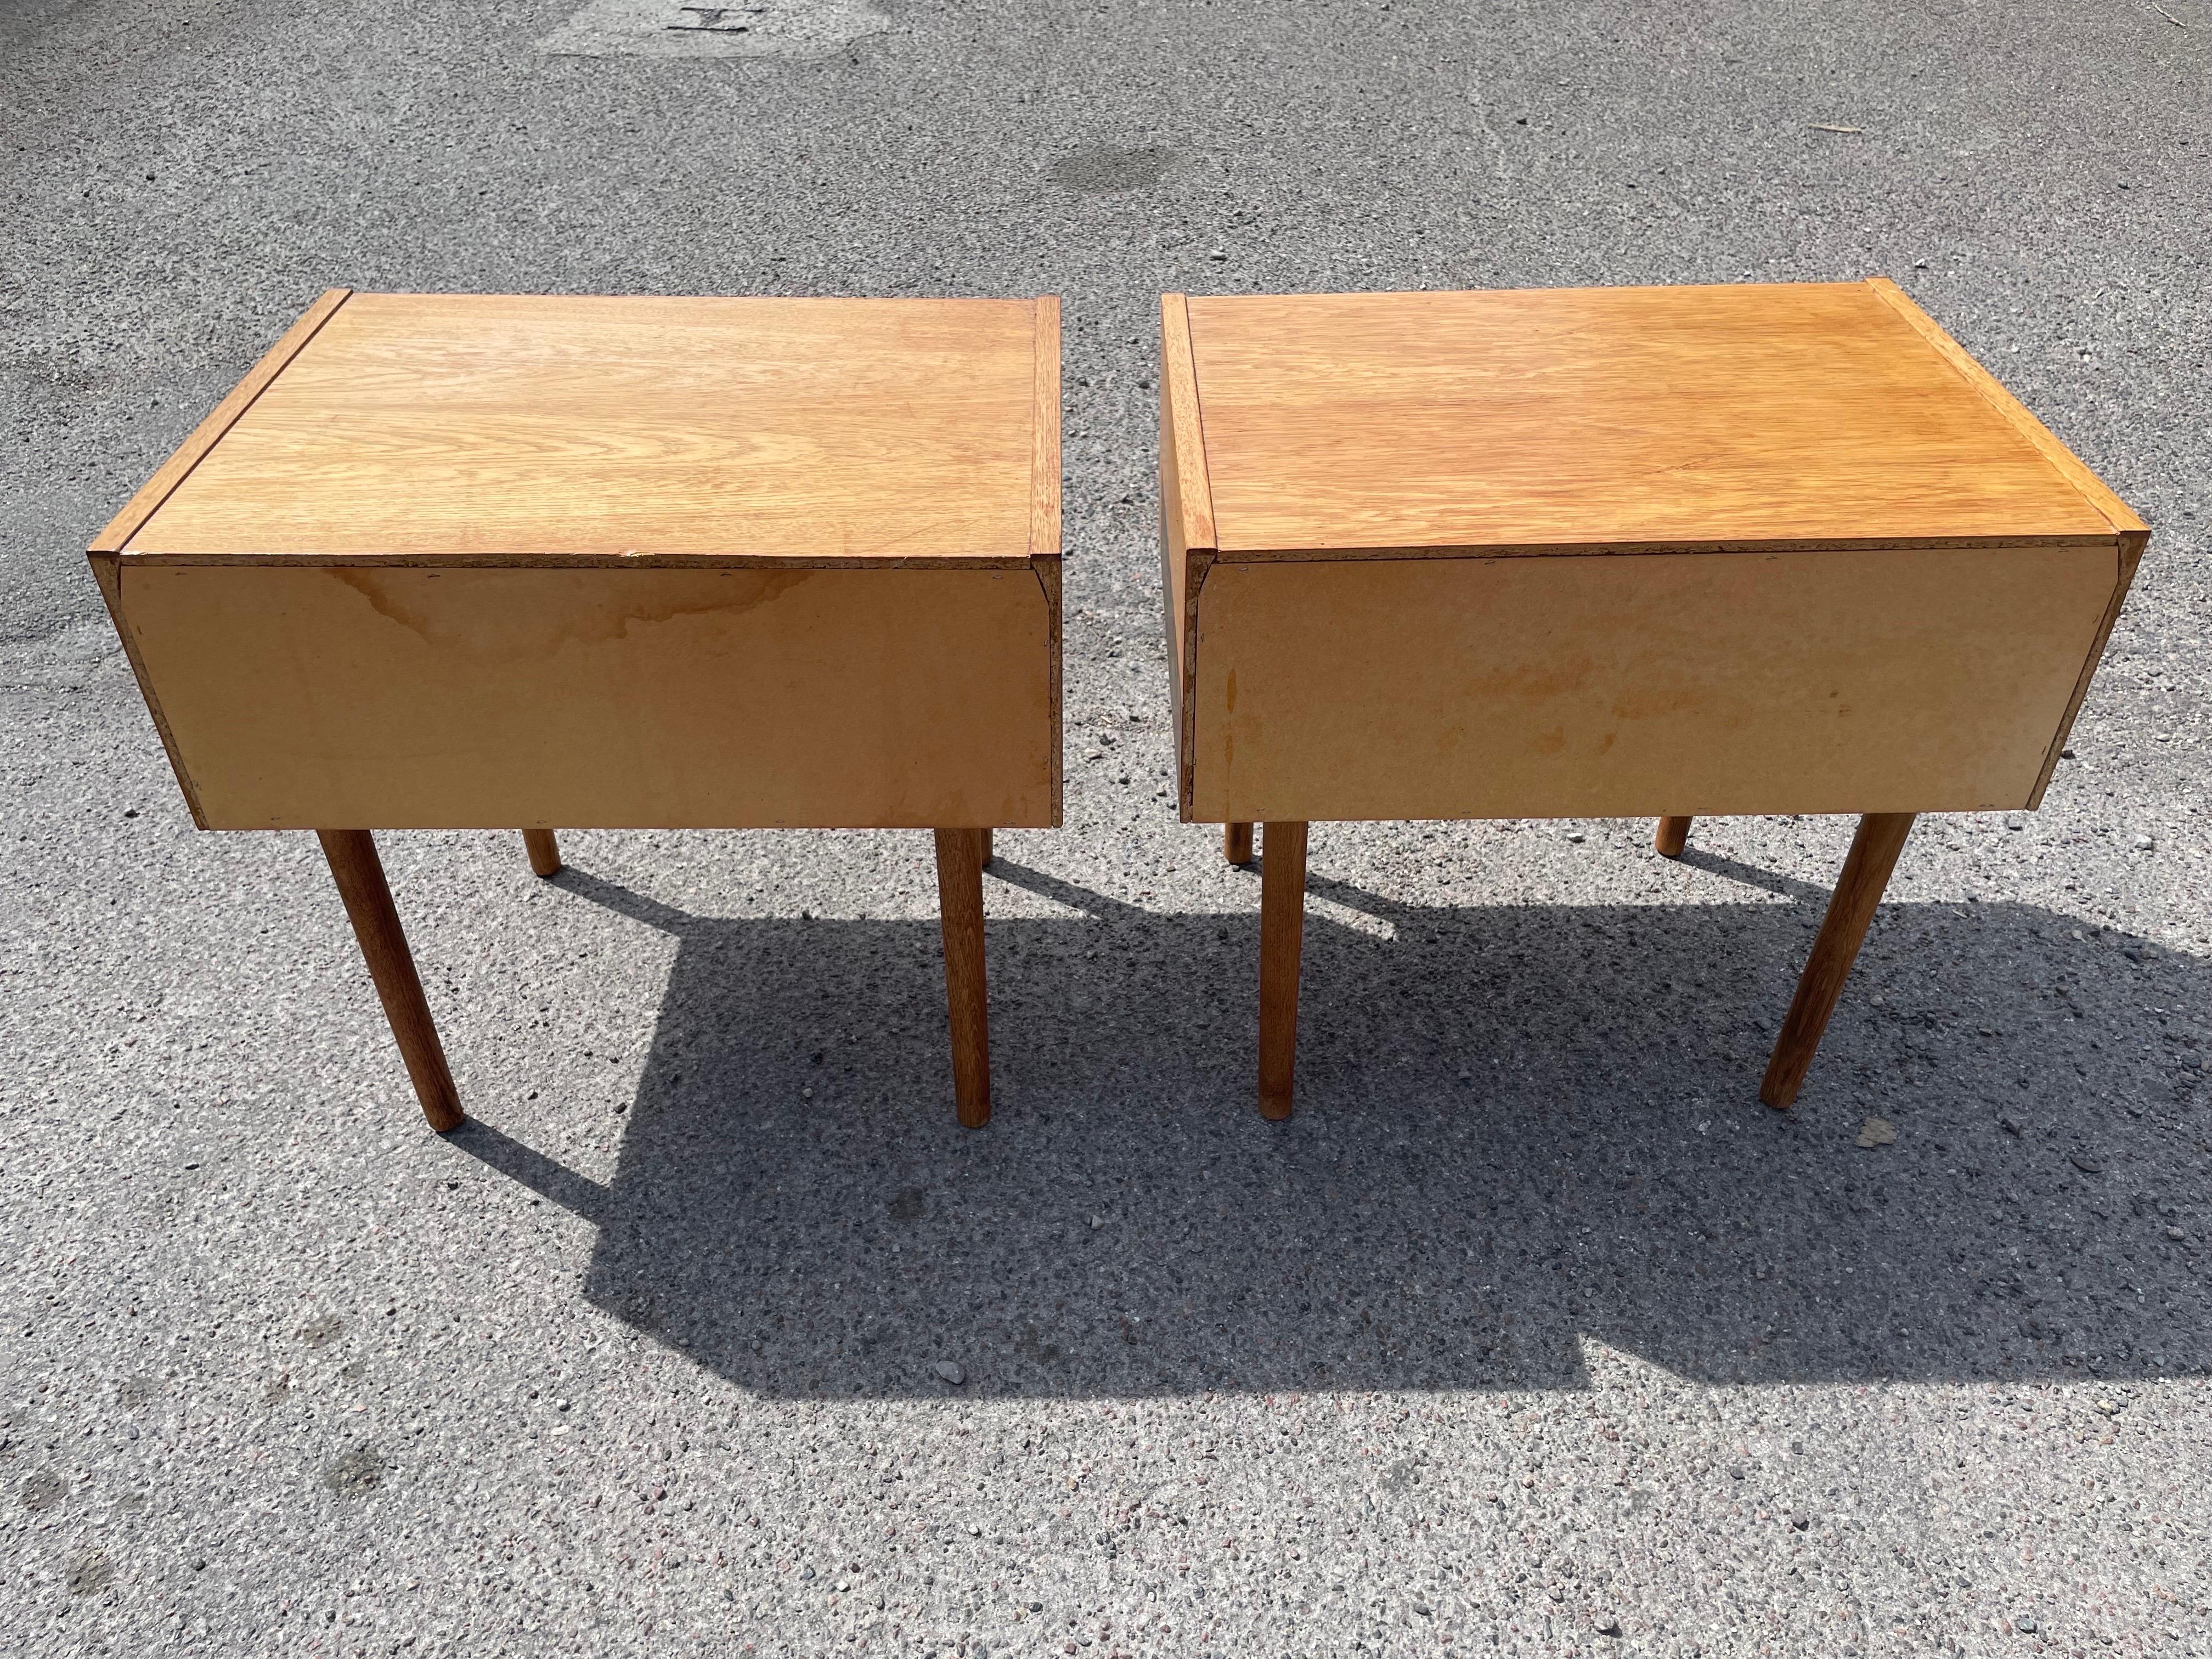 Set of Spacious Danish Mid-Century Modern Nightstands from the 1960s For Sale 2